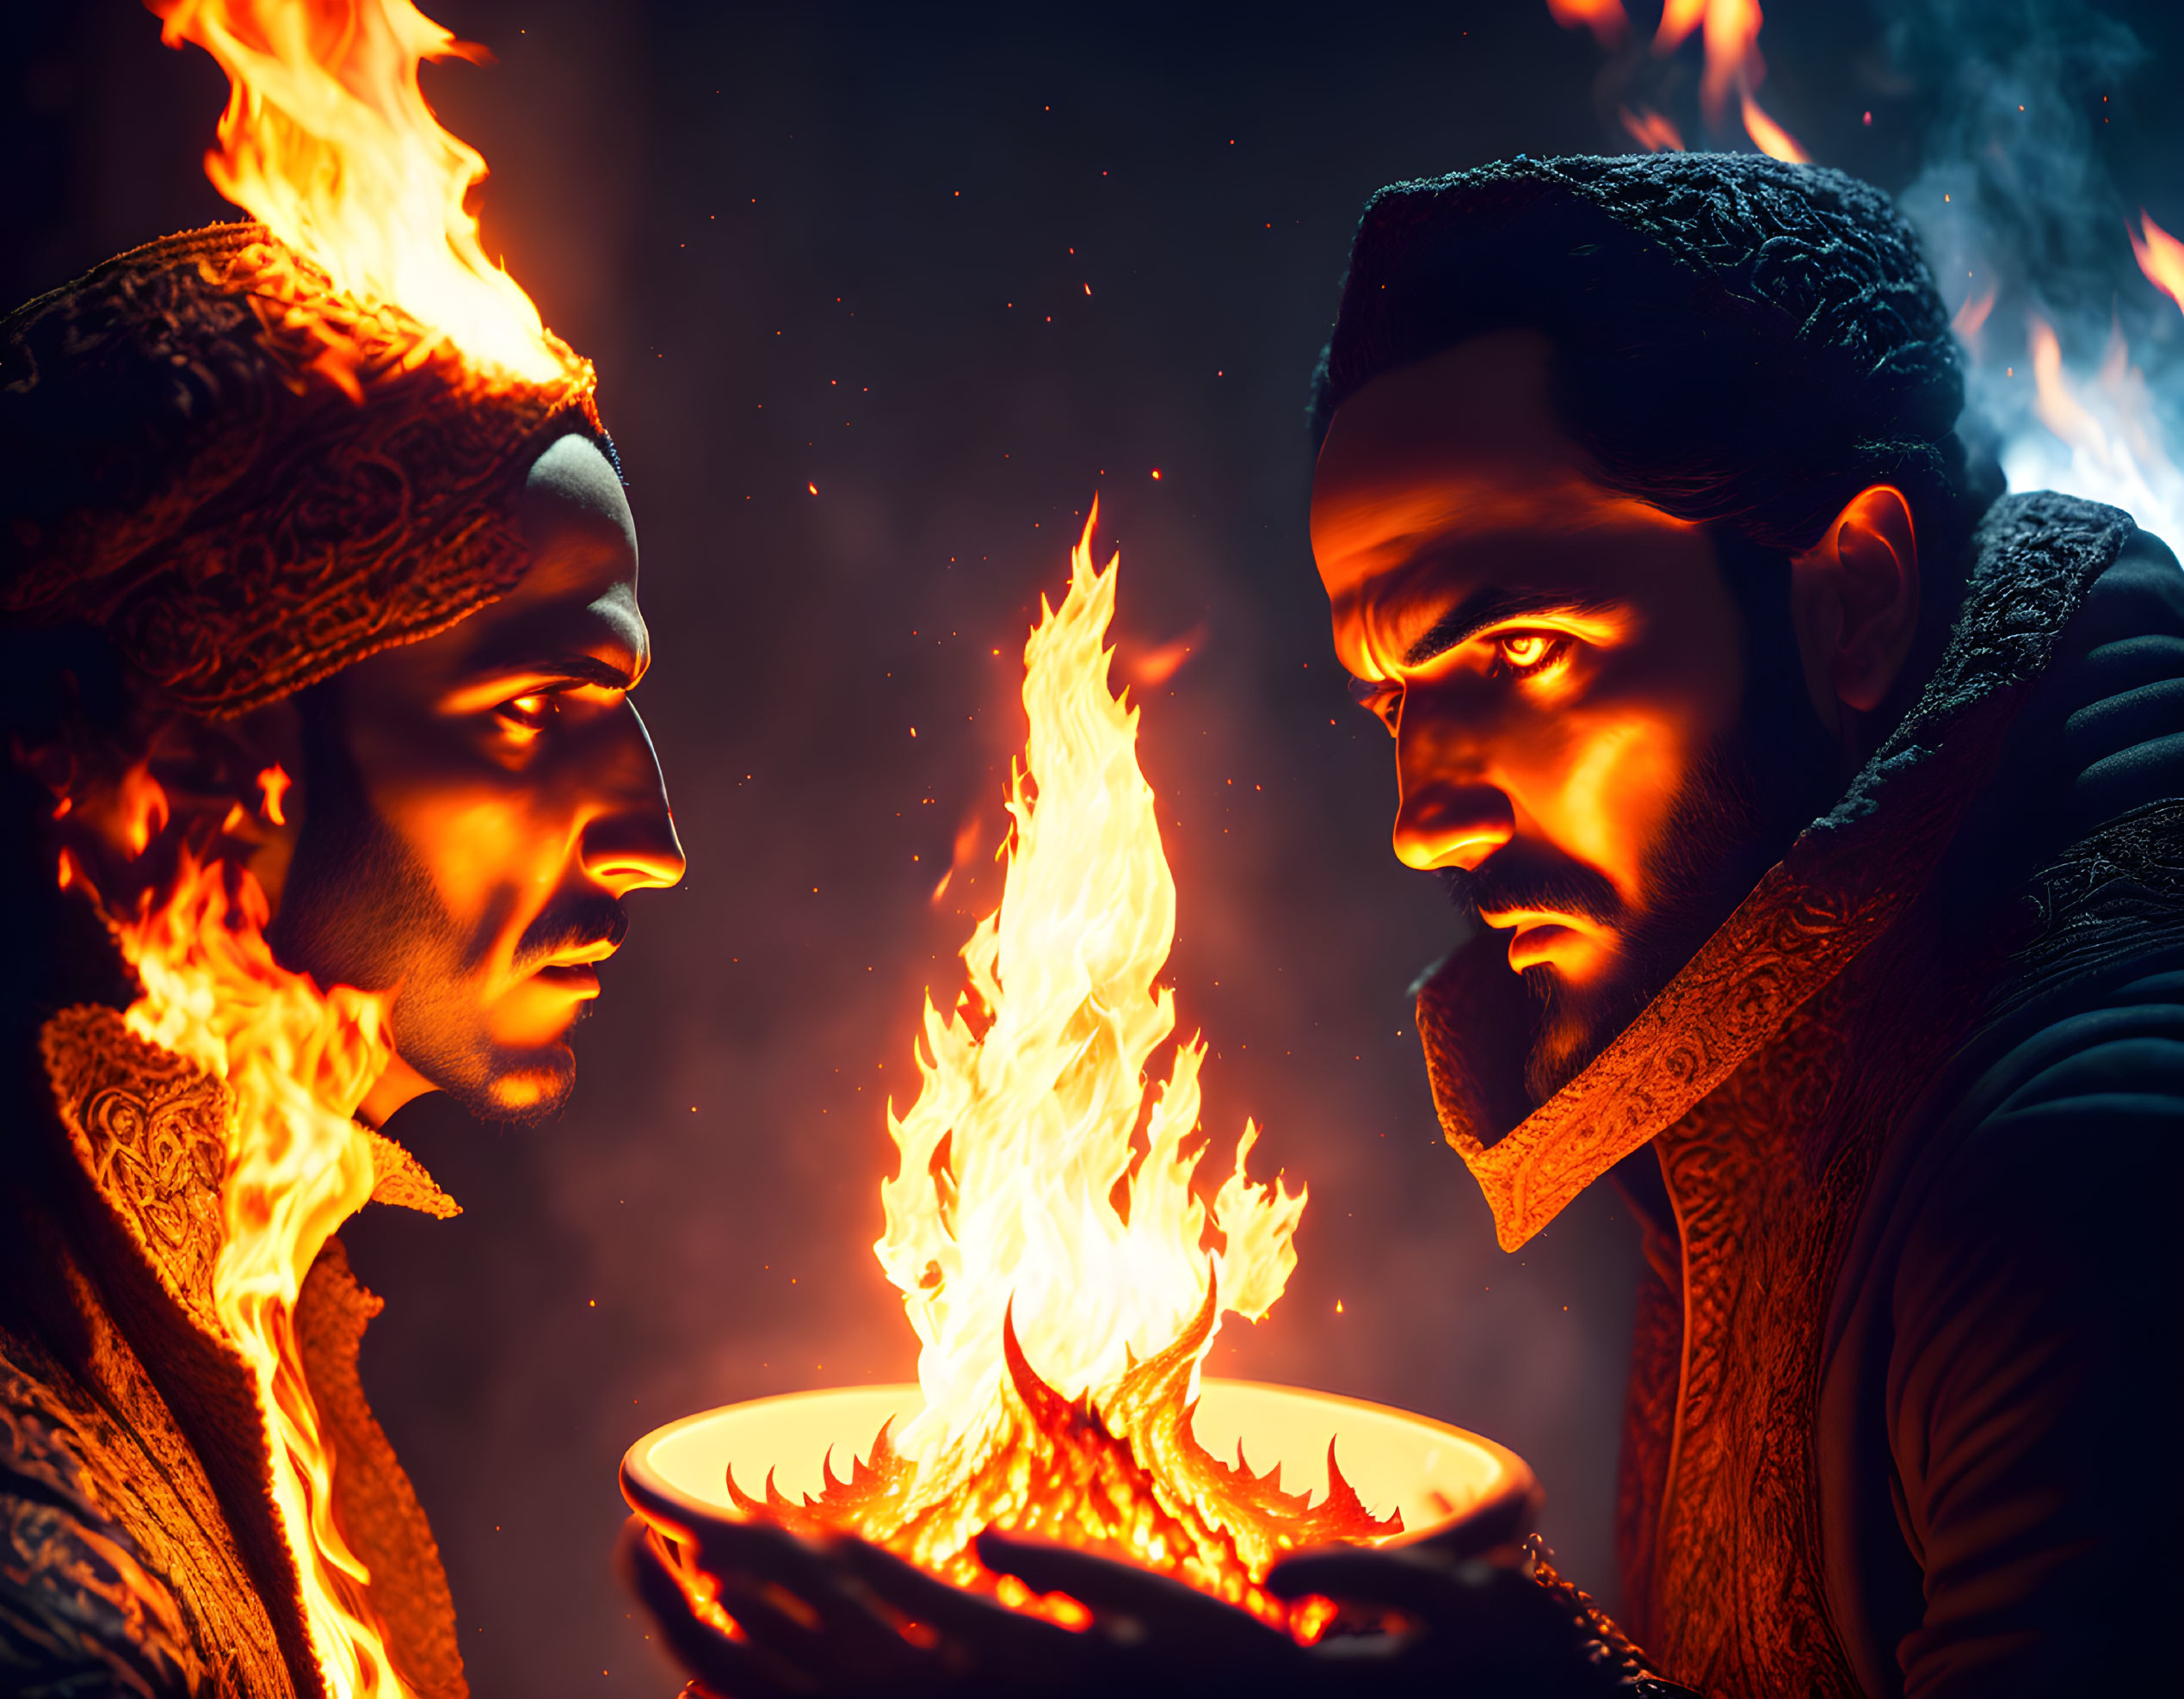 Two individuals in elaborate attire with intense expressions face each other over a bowl of fire